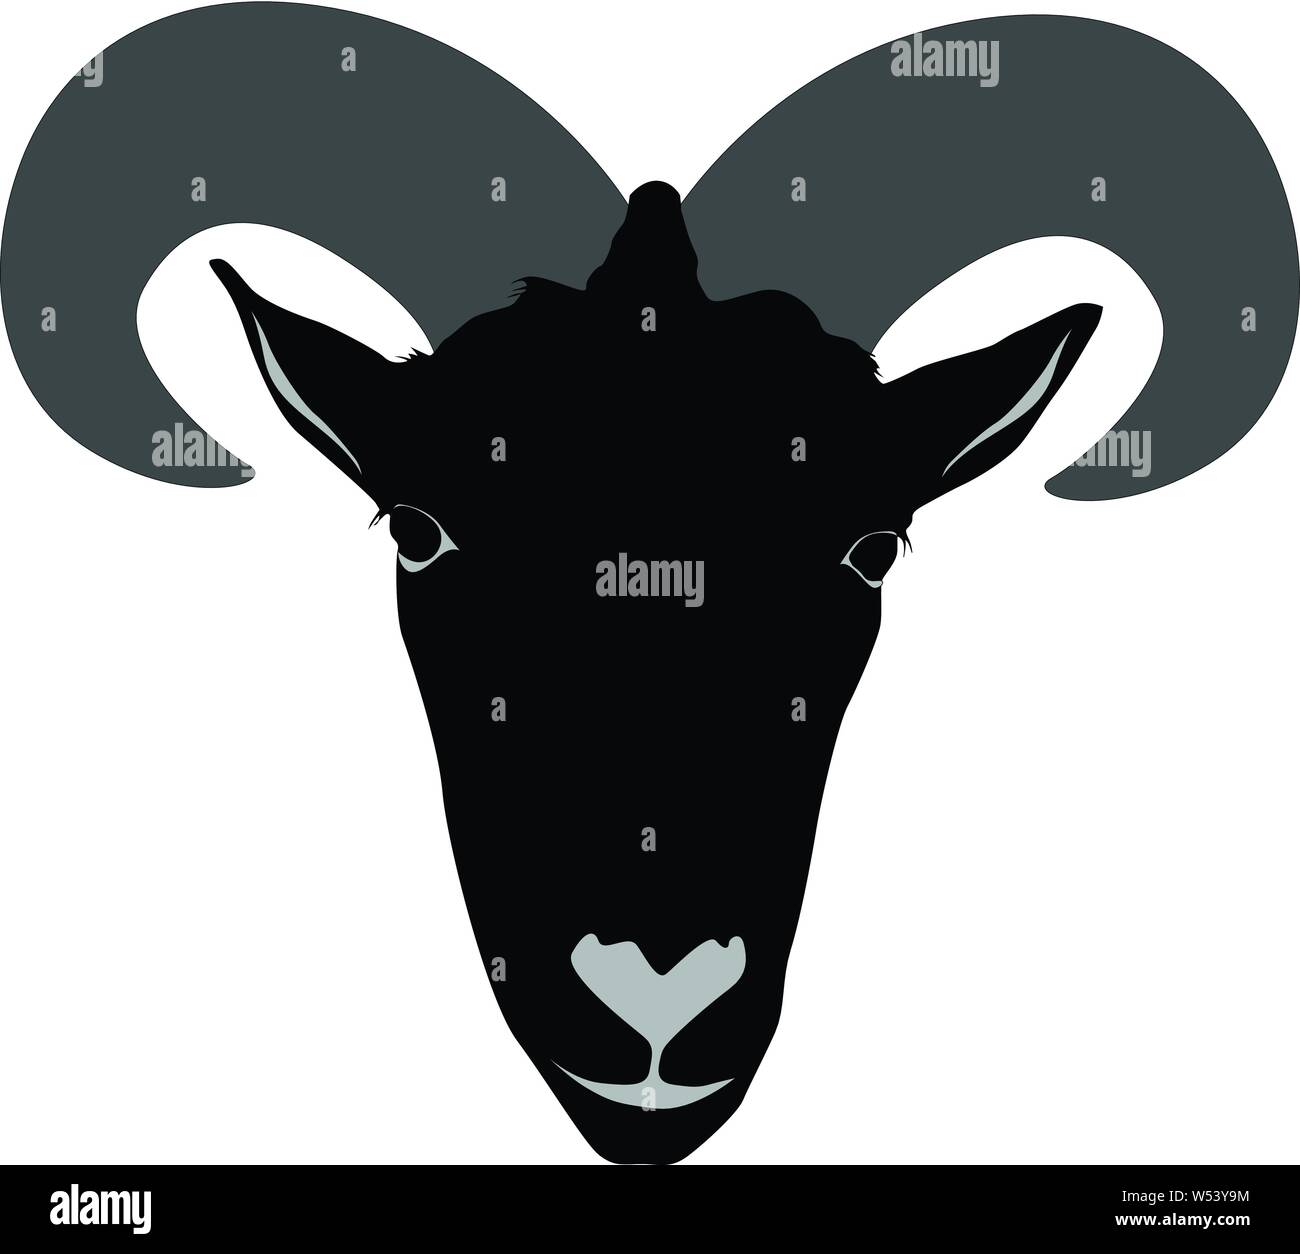 Barbery sheep portrait silhouette vector illustration isolated Stock Vector